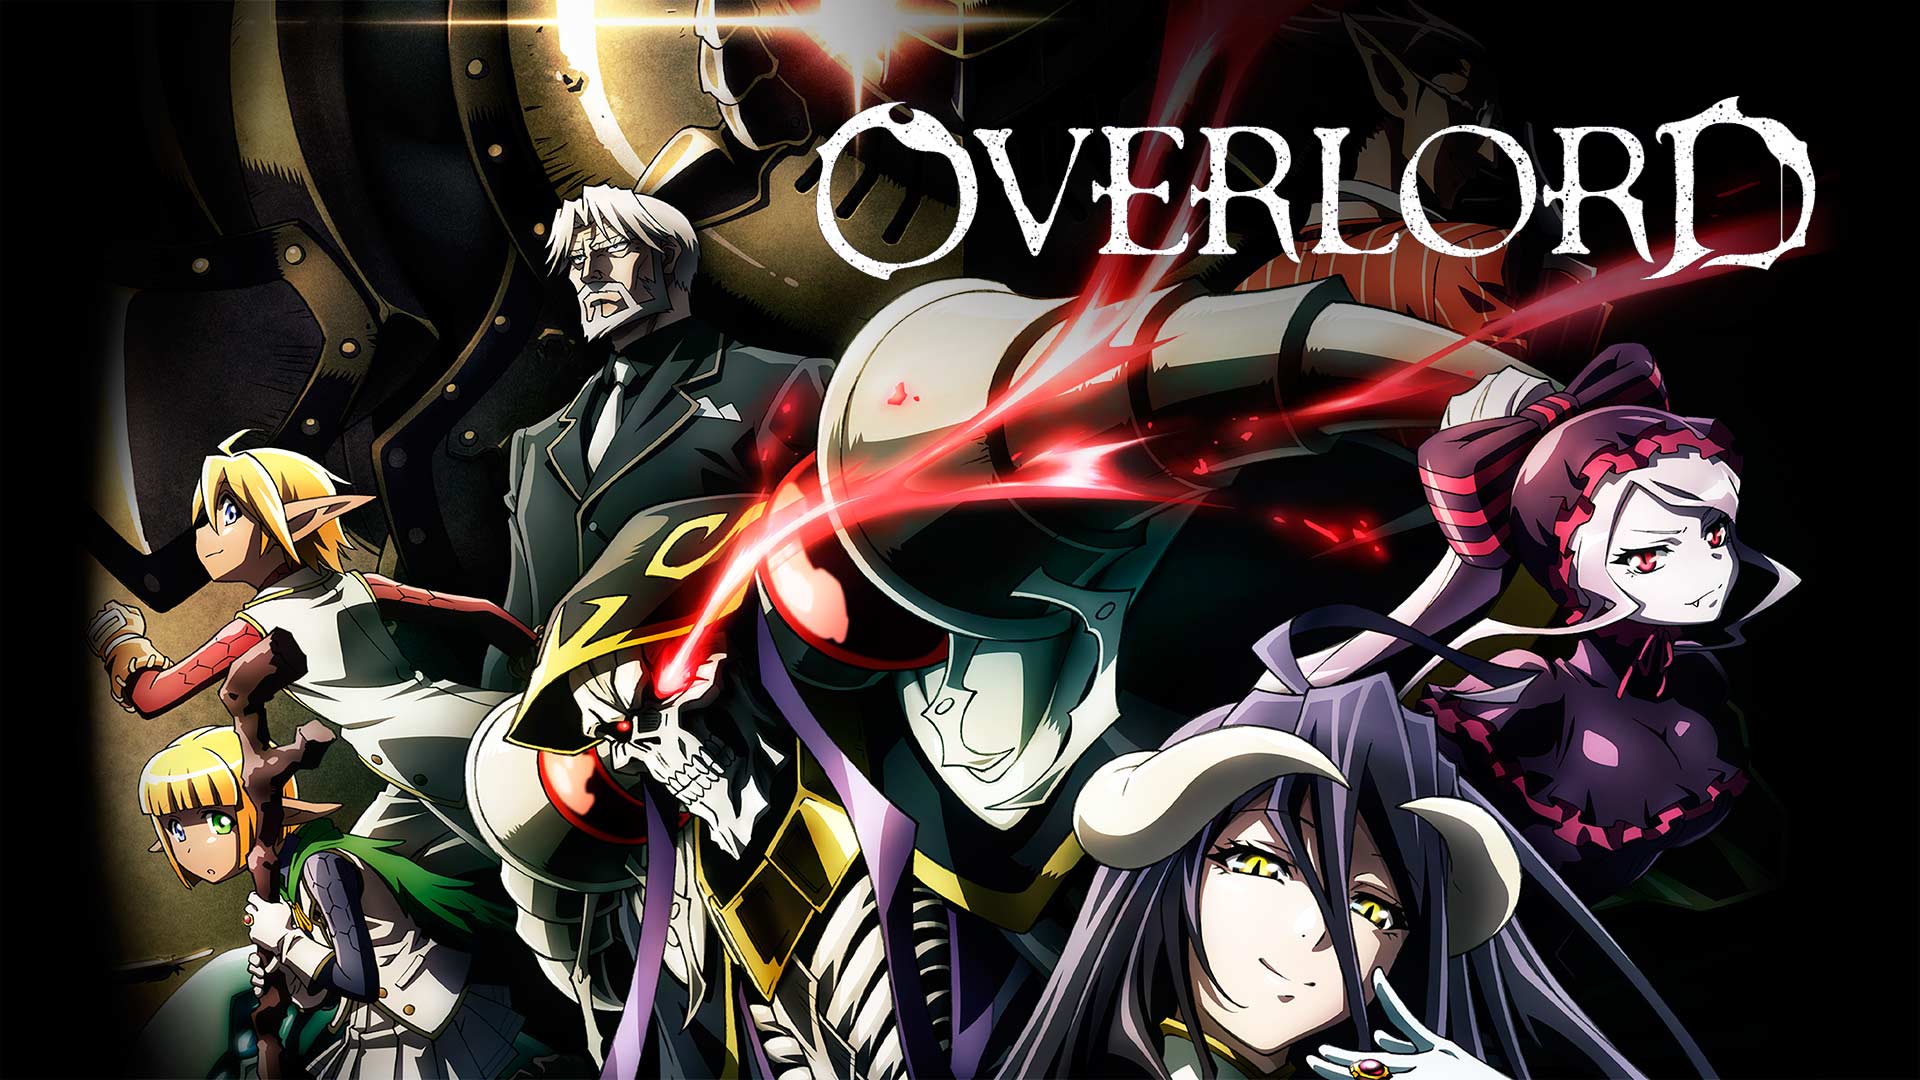 Overlord Season 3 - watch full episodes streaming online